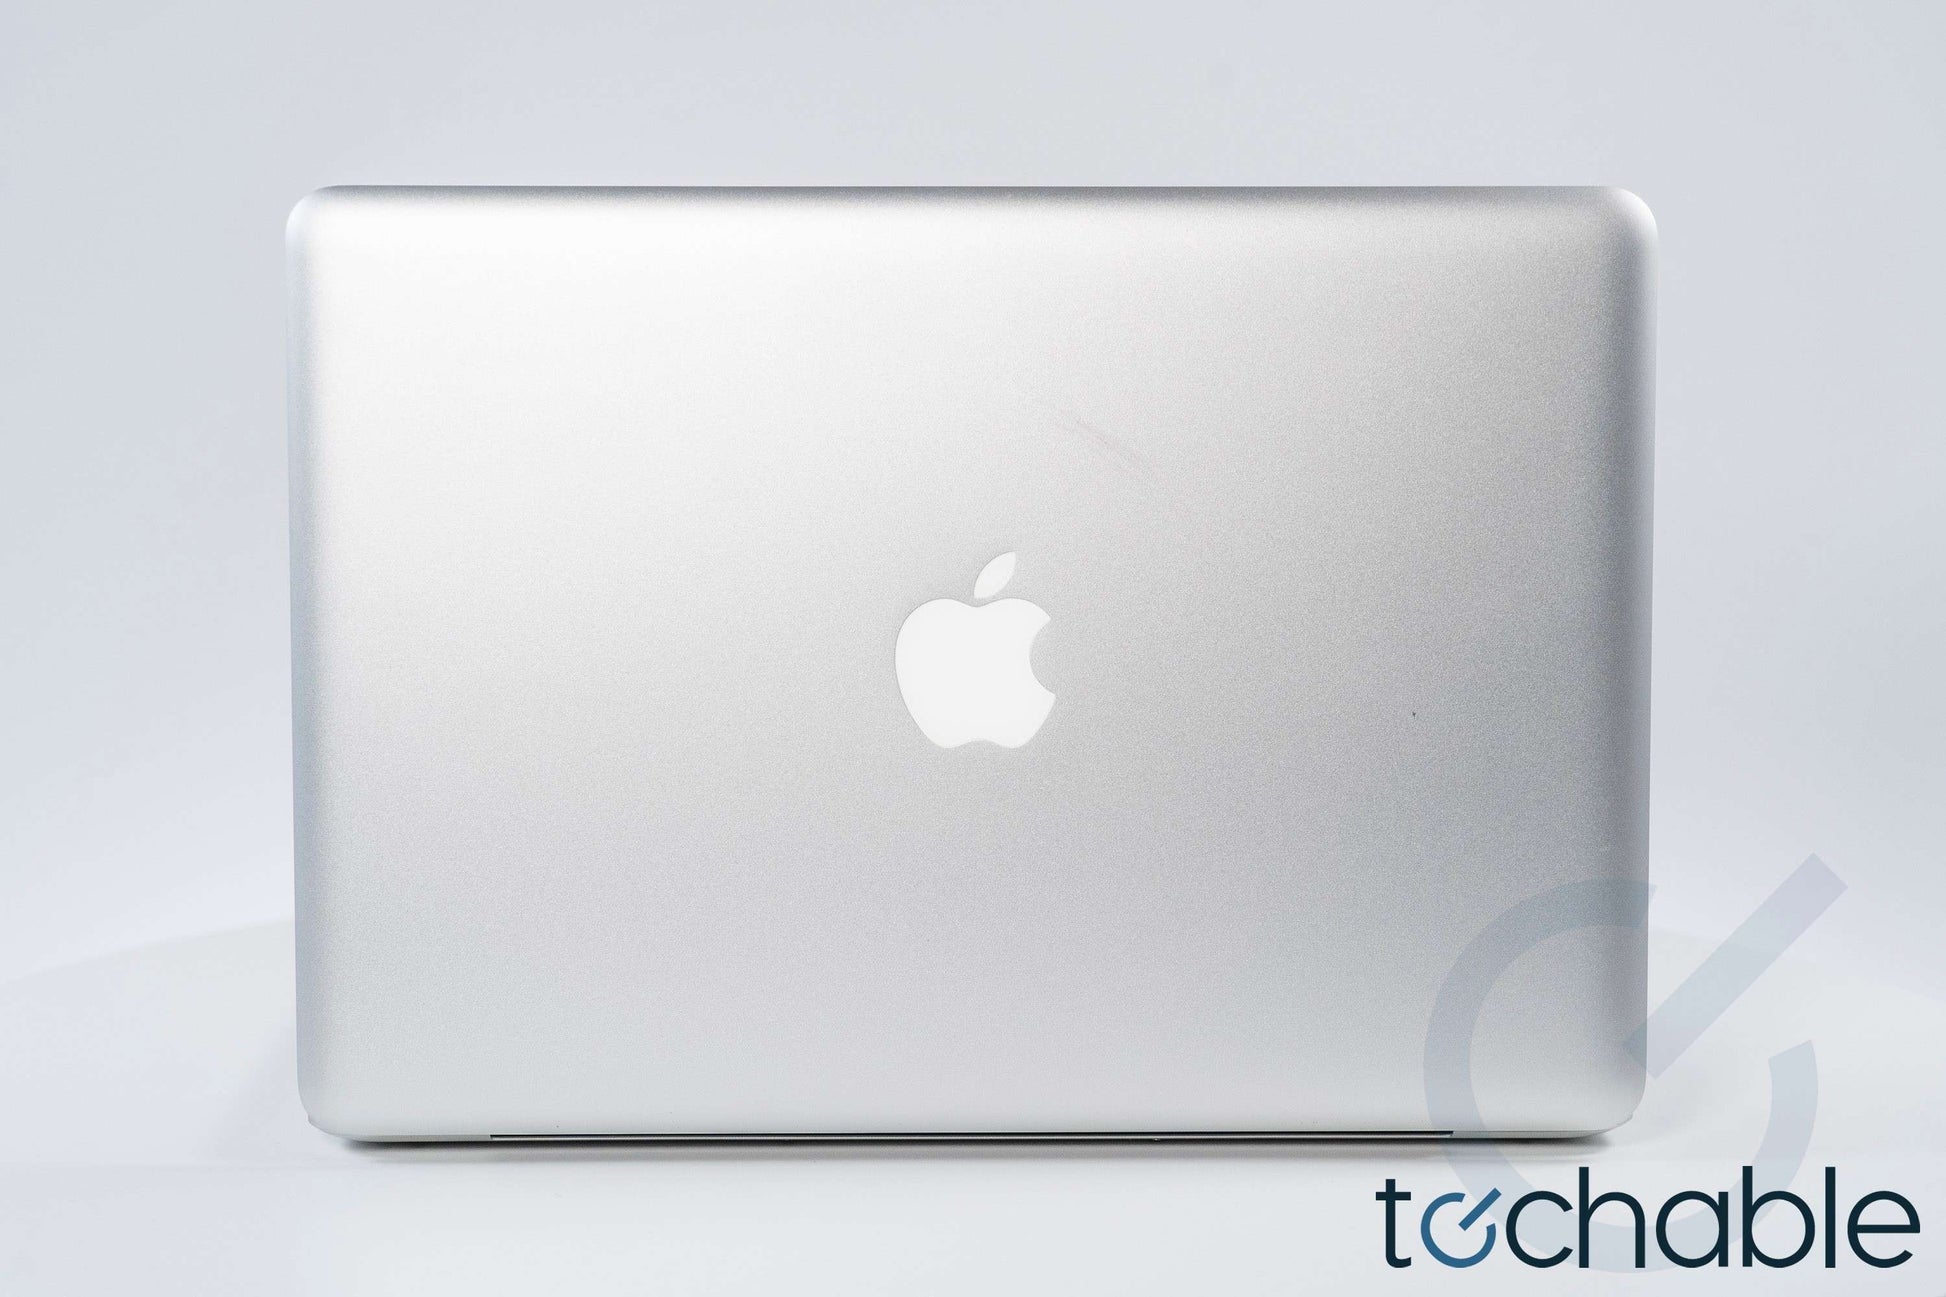 Apple Macbook Pro Laptop 15-Inch 2.6Ghz - 3.6Ghz Core i7 MD104LL/a (2012)